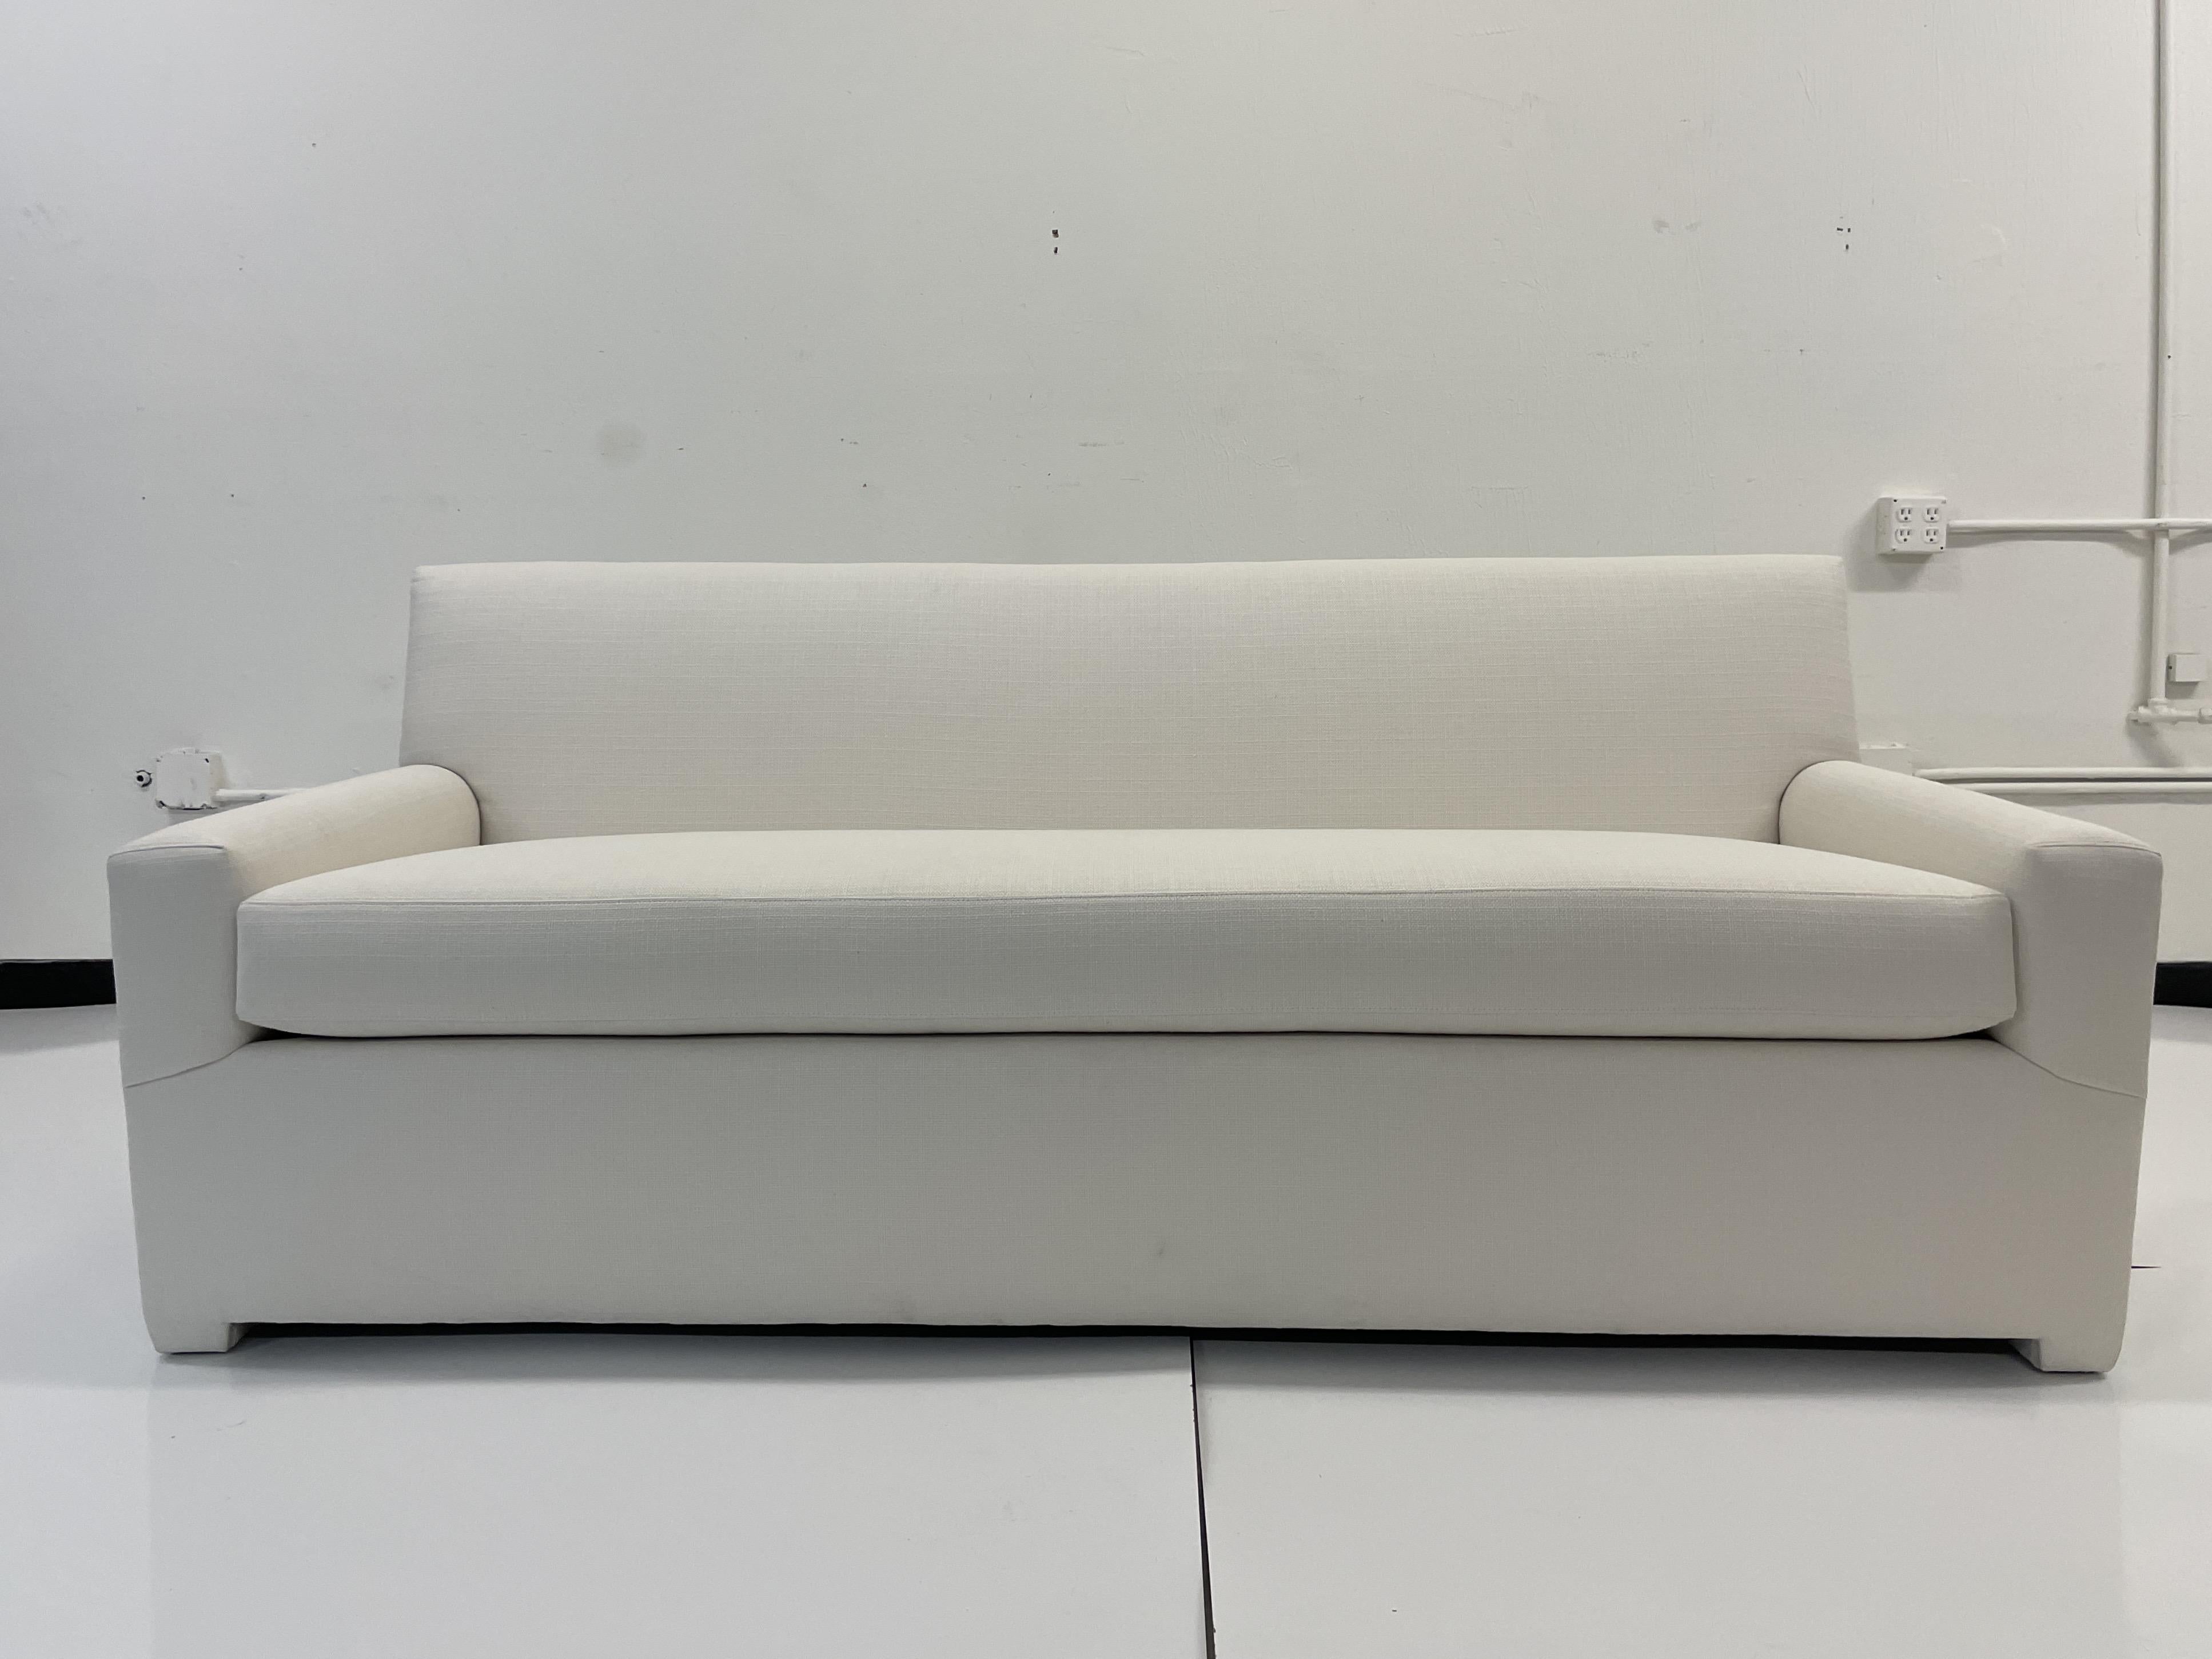 Classic modern details with old Hollywood Glam designed by Todd Hase. Add some modern elements to your living space. This Classic sofa will work well with many styles of interiors and is upholstered in Todd Hase Textiles High Performance off-white.